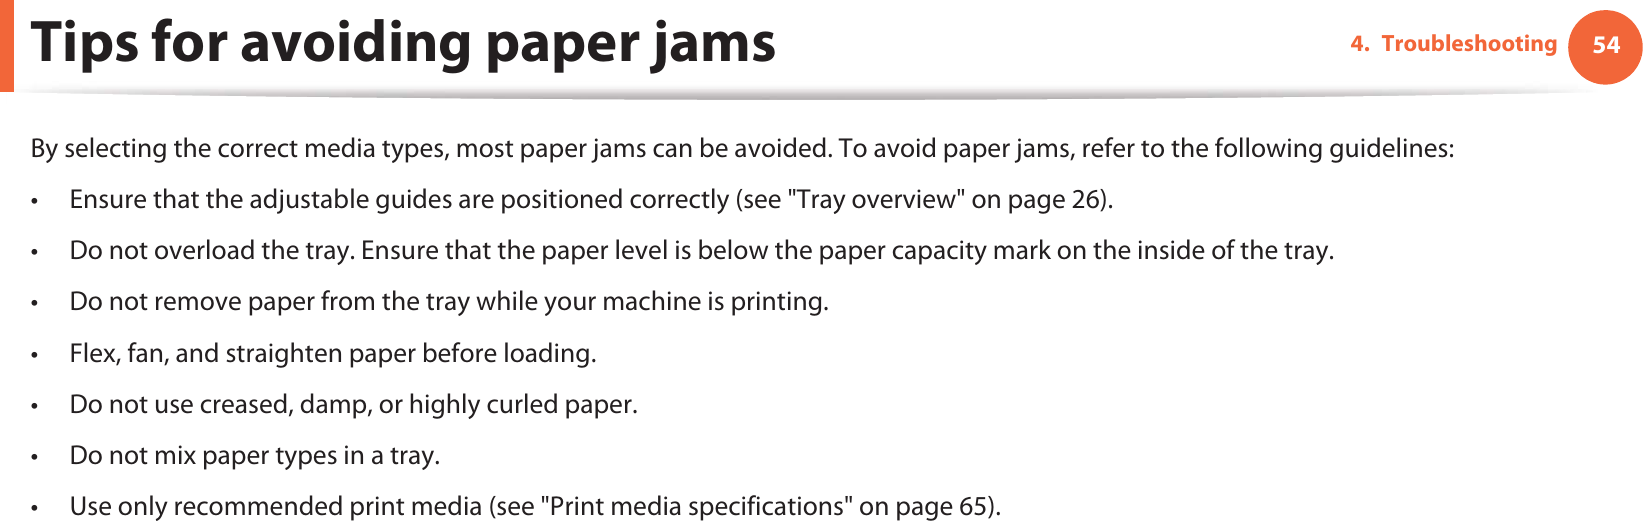 544. TroubleshootingTips for avoiding paper jamsBy selecting the correct media types, most paper jams can be avoided. To avoid paper jams, refer to the following guidelines:• Ensure that the adjustable guides are positioned correctly (see &quot;Tray overview&quot; on page 26).• Do not overload the tray. Ensure that the paper level is below the paper capacity mark on the inside of the tray.• Do not remove paper from the tray while your machine is printing.• Flex, fan, and straighten paper before loading. • Do not use creased, damp, or highly curled paper.• Do not mix paper types in a tray.• Use only recommended print media (see &quot;Print media specifications&quot; on page 65).